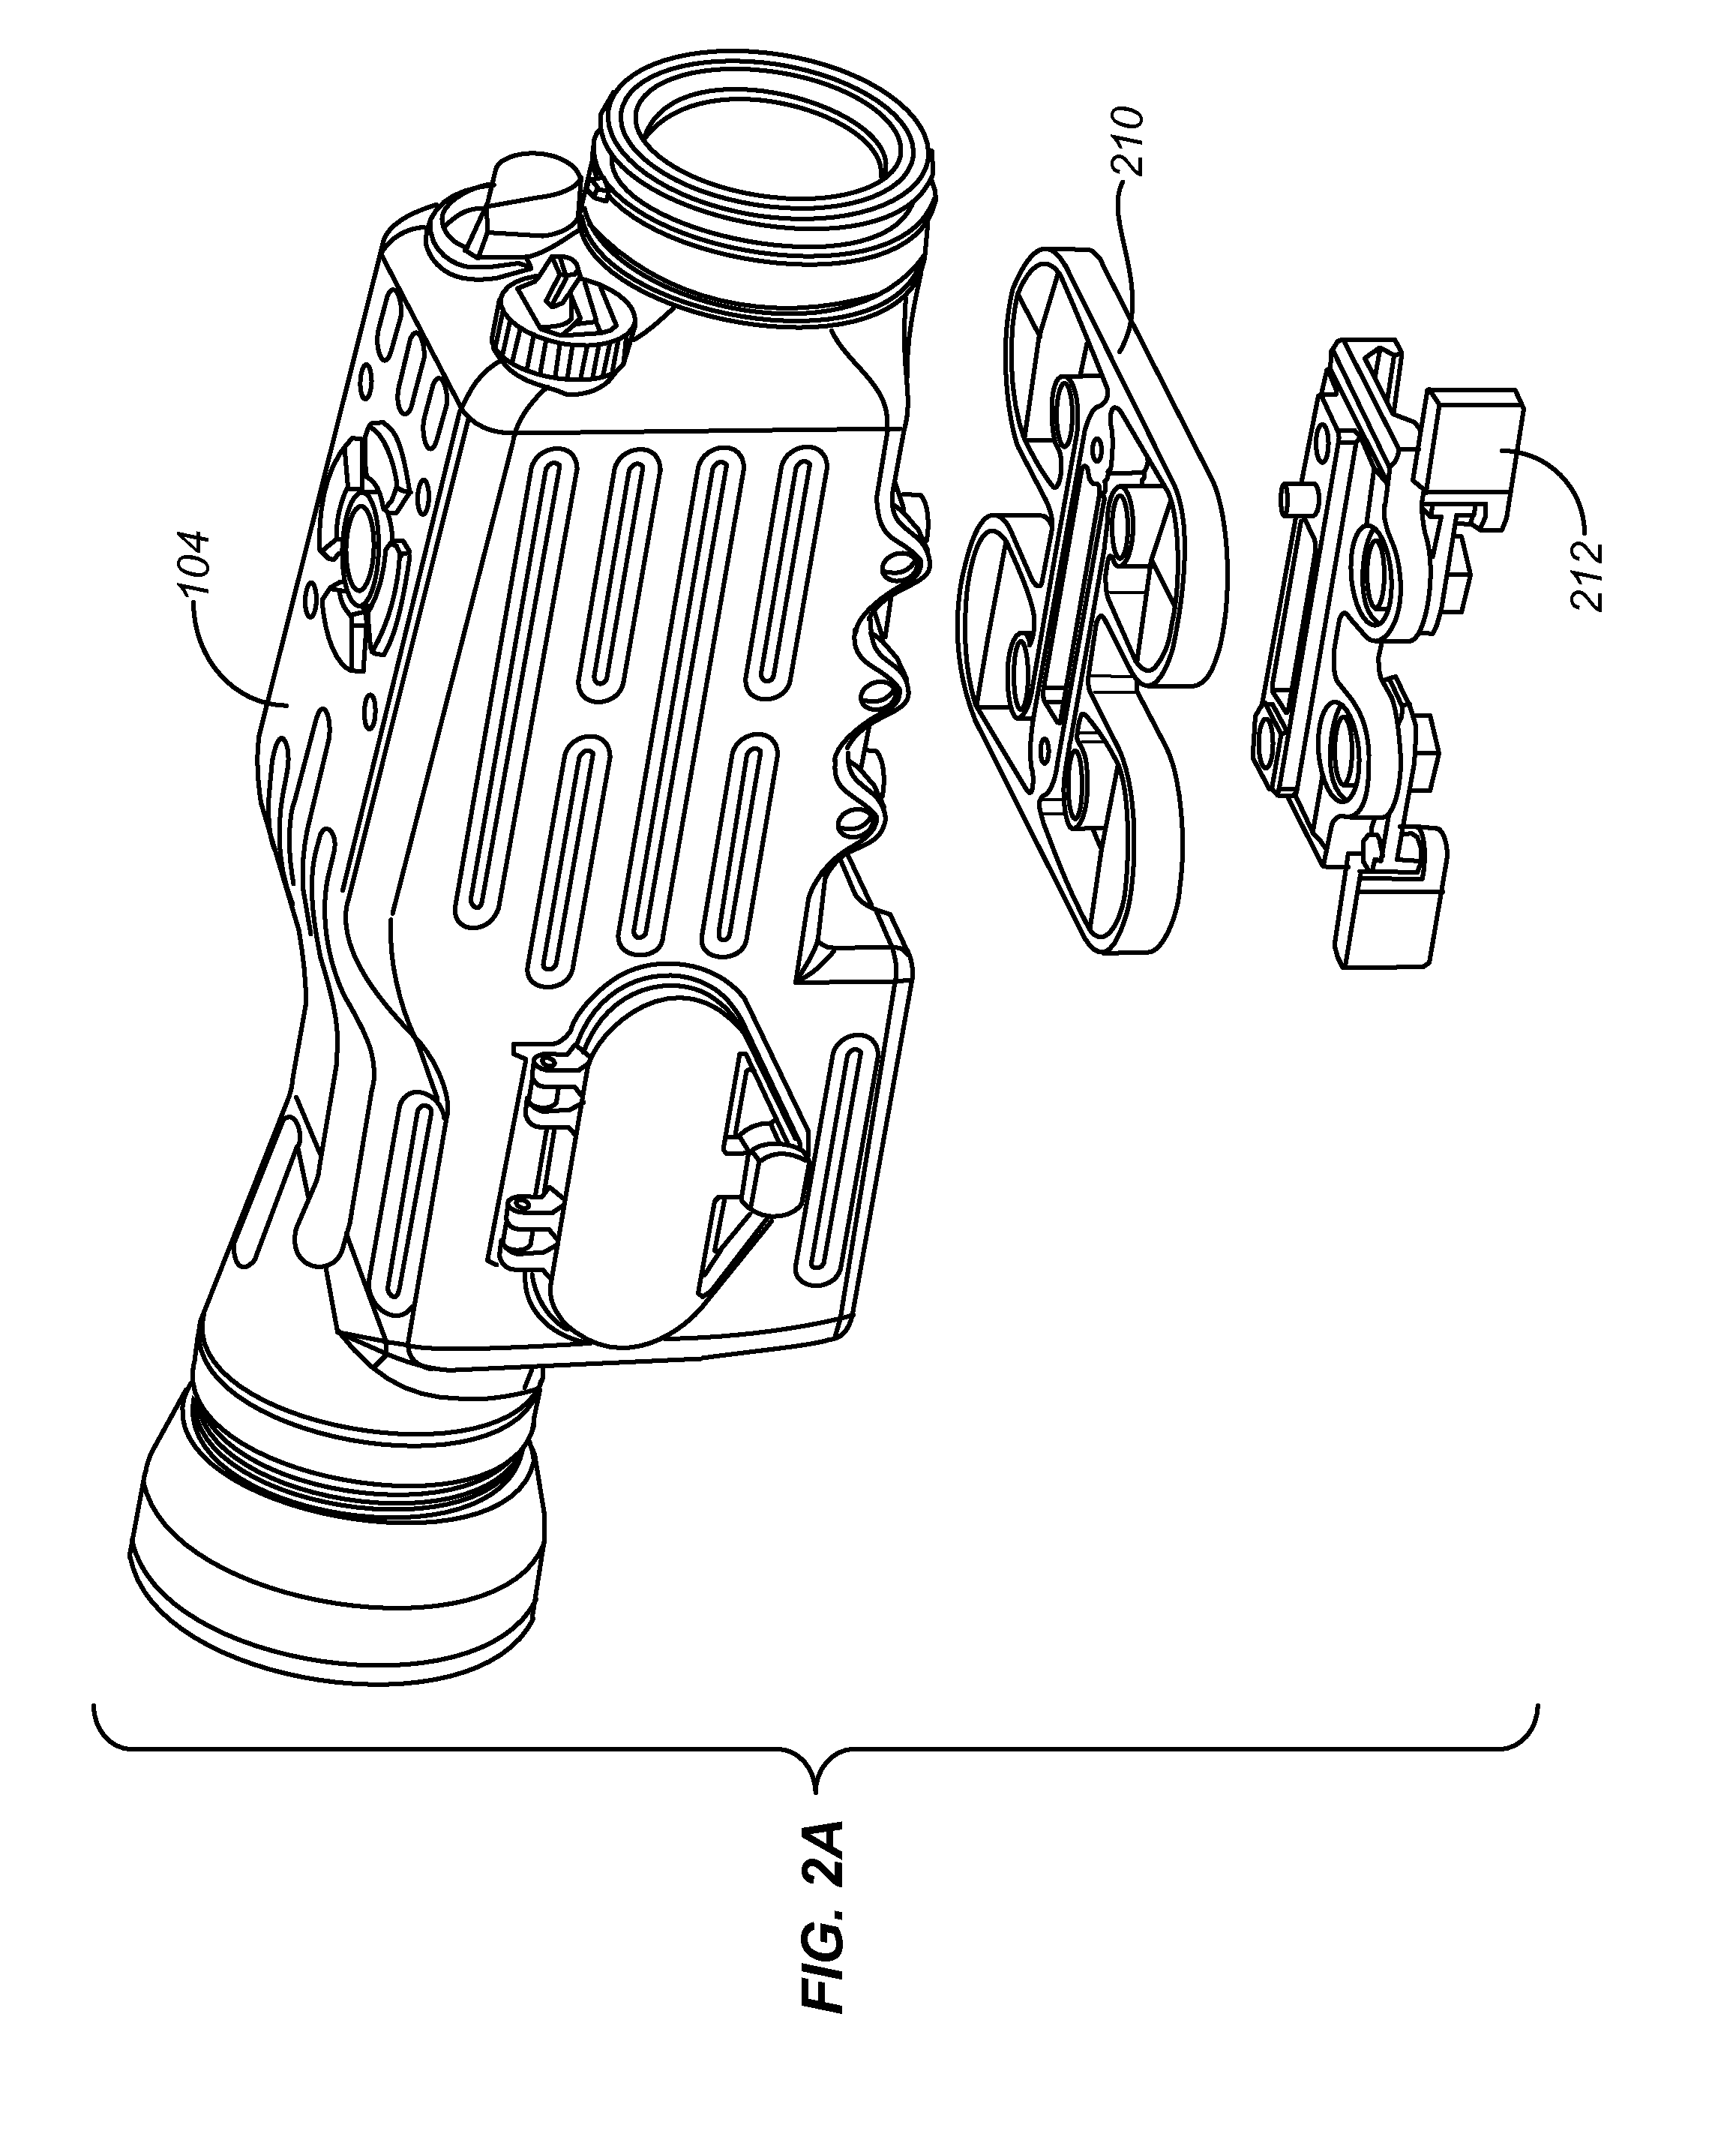 Method and apparatus for absorbing shock in an optical system